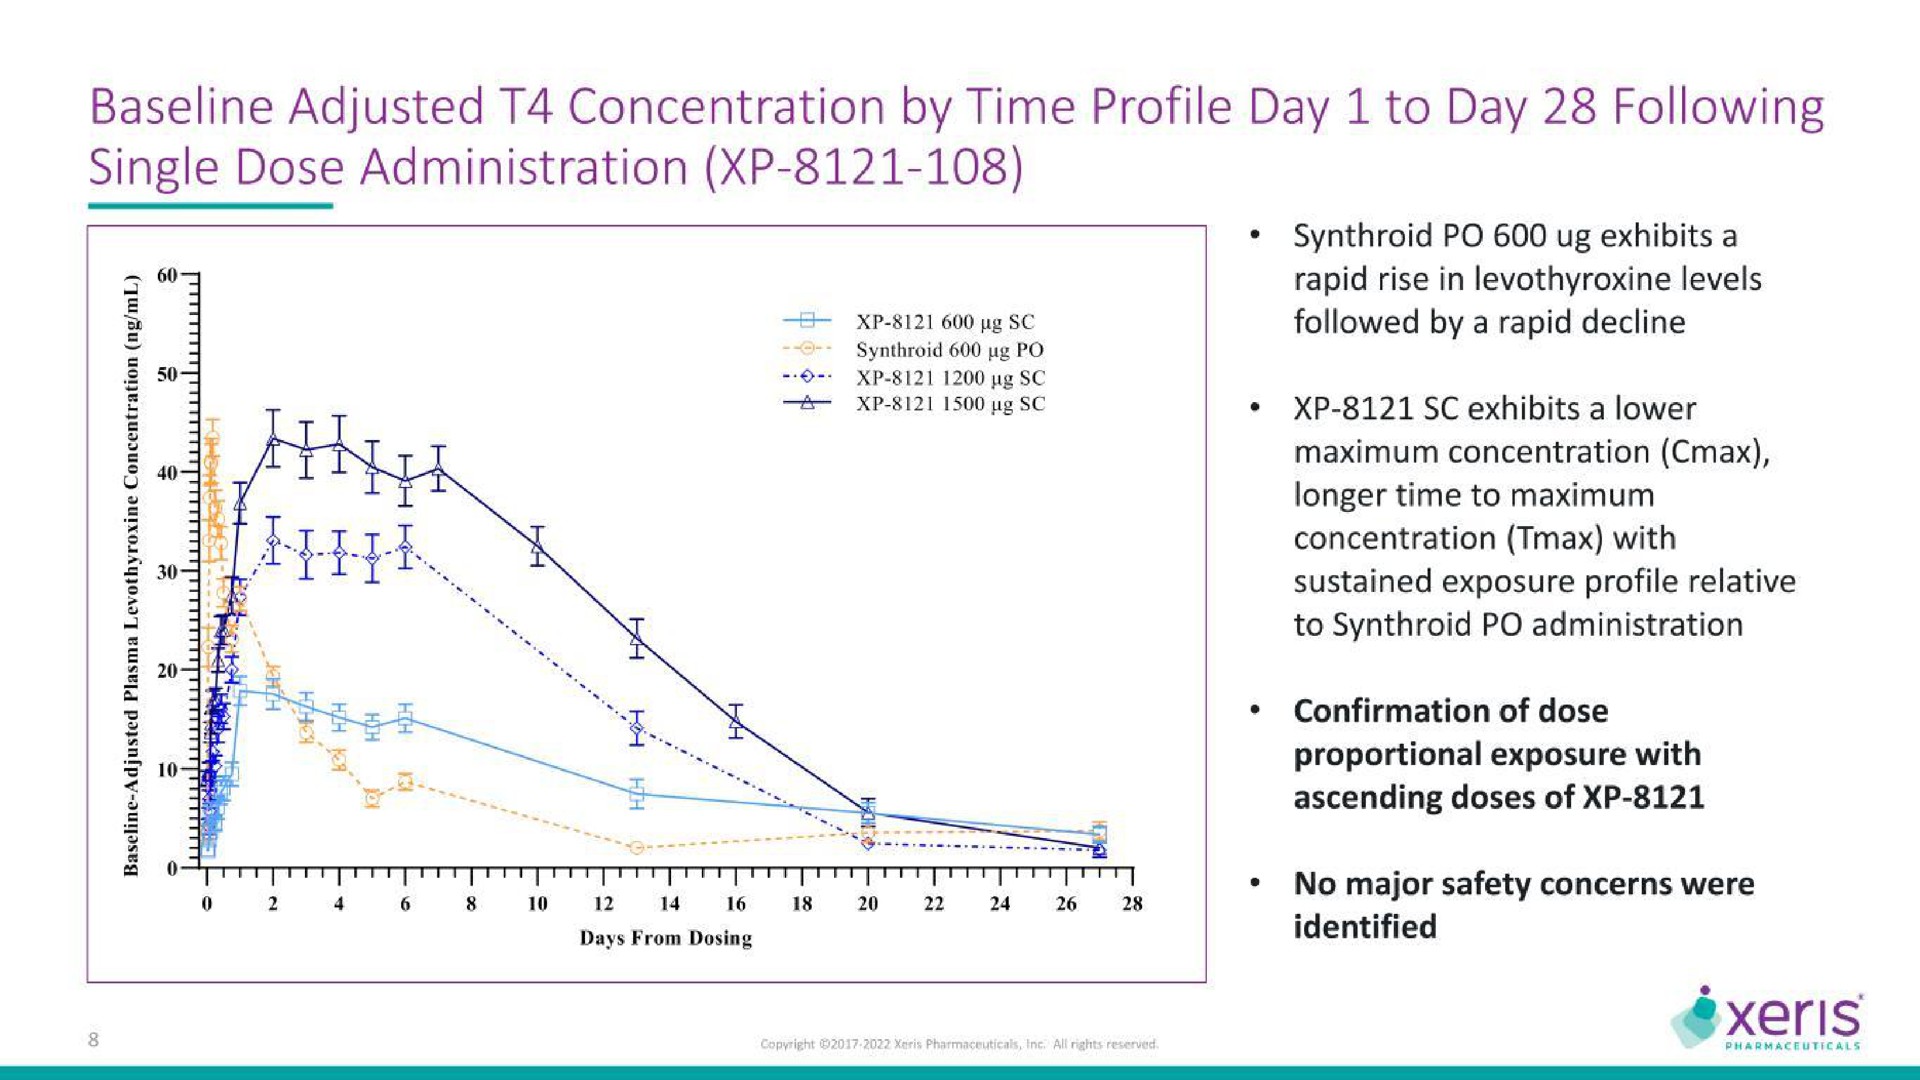 adjusted concentration by time profile day to day following single dose administration | Xeris Biopharma